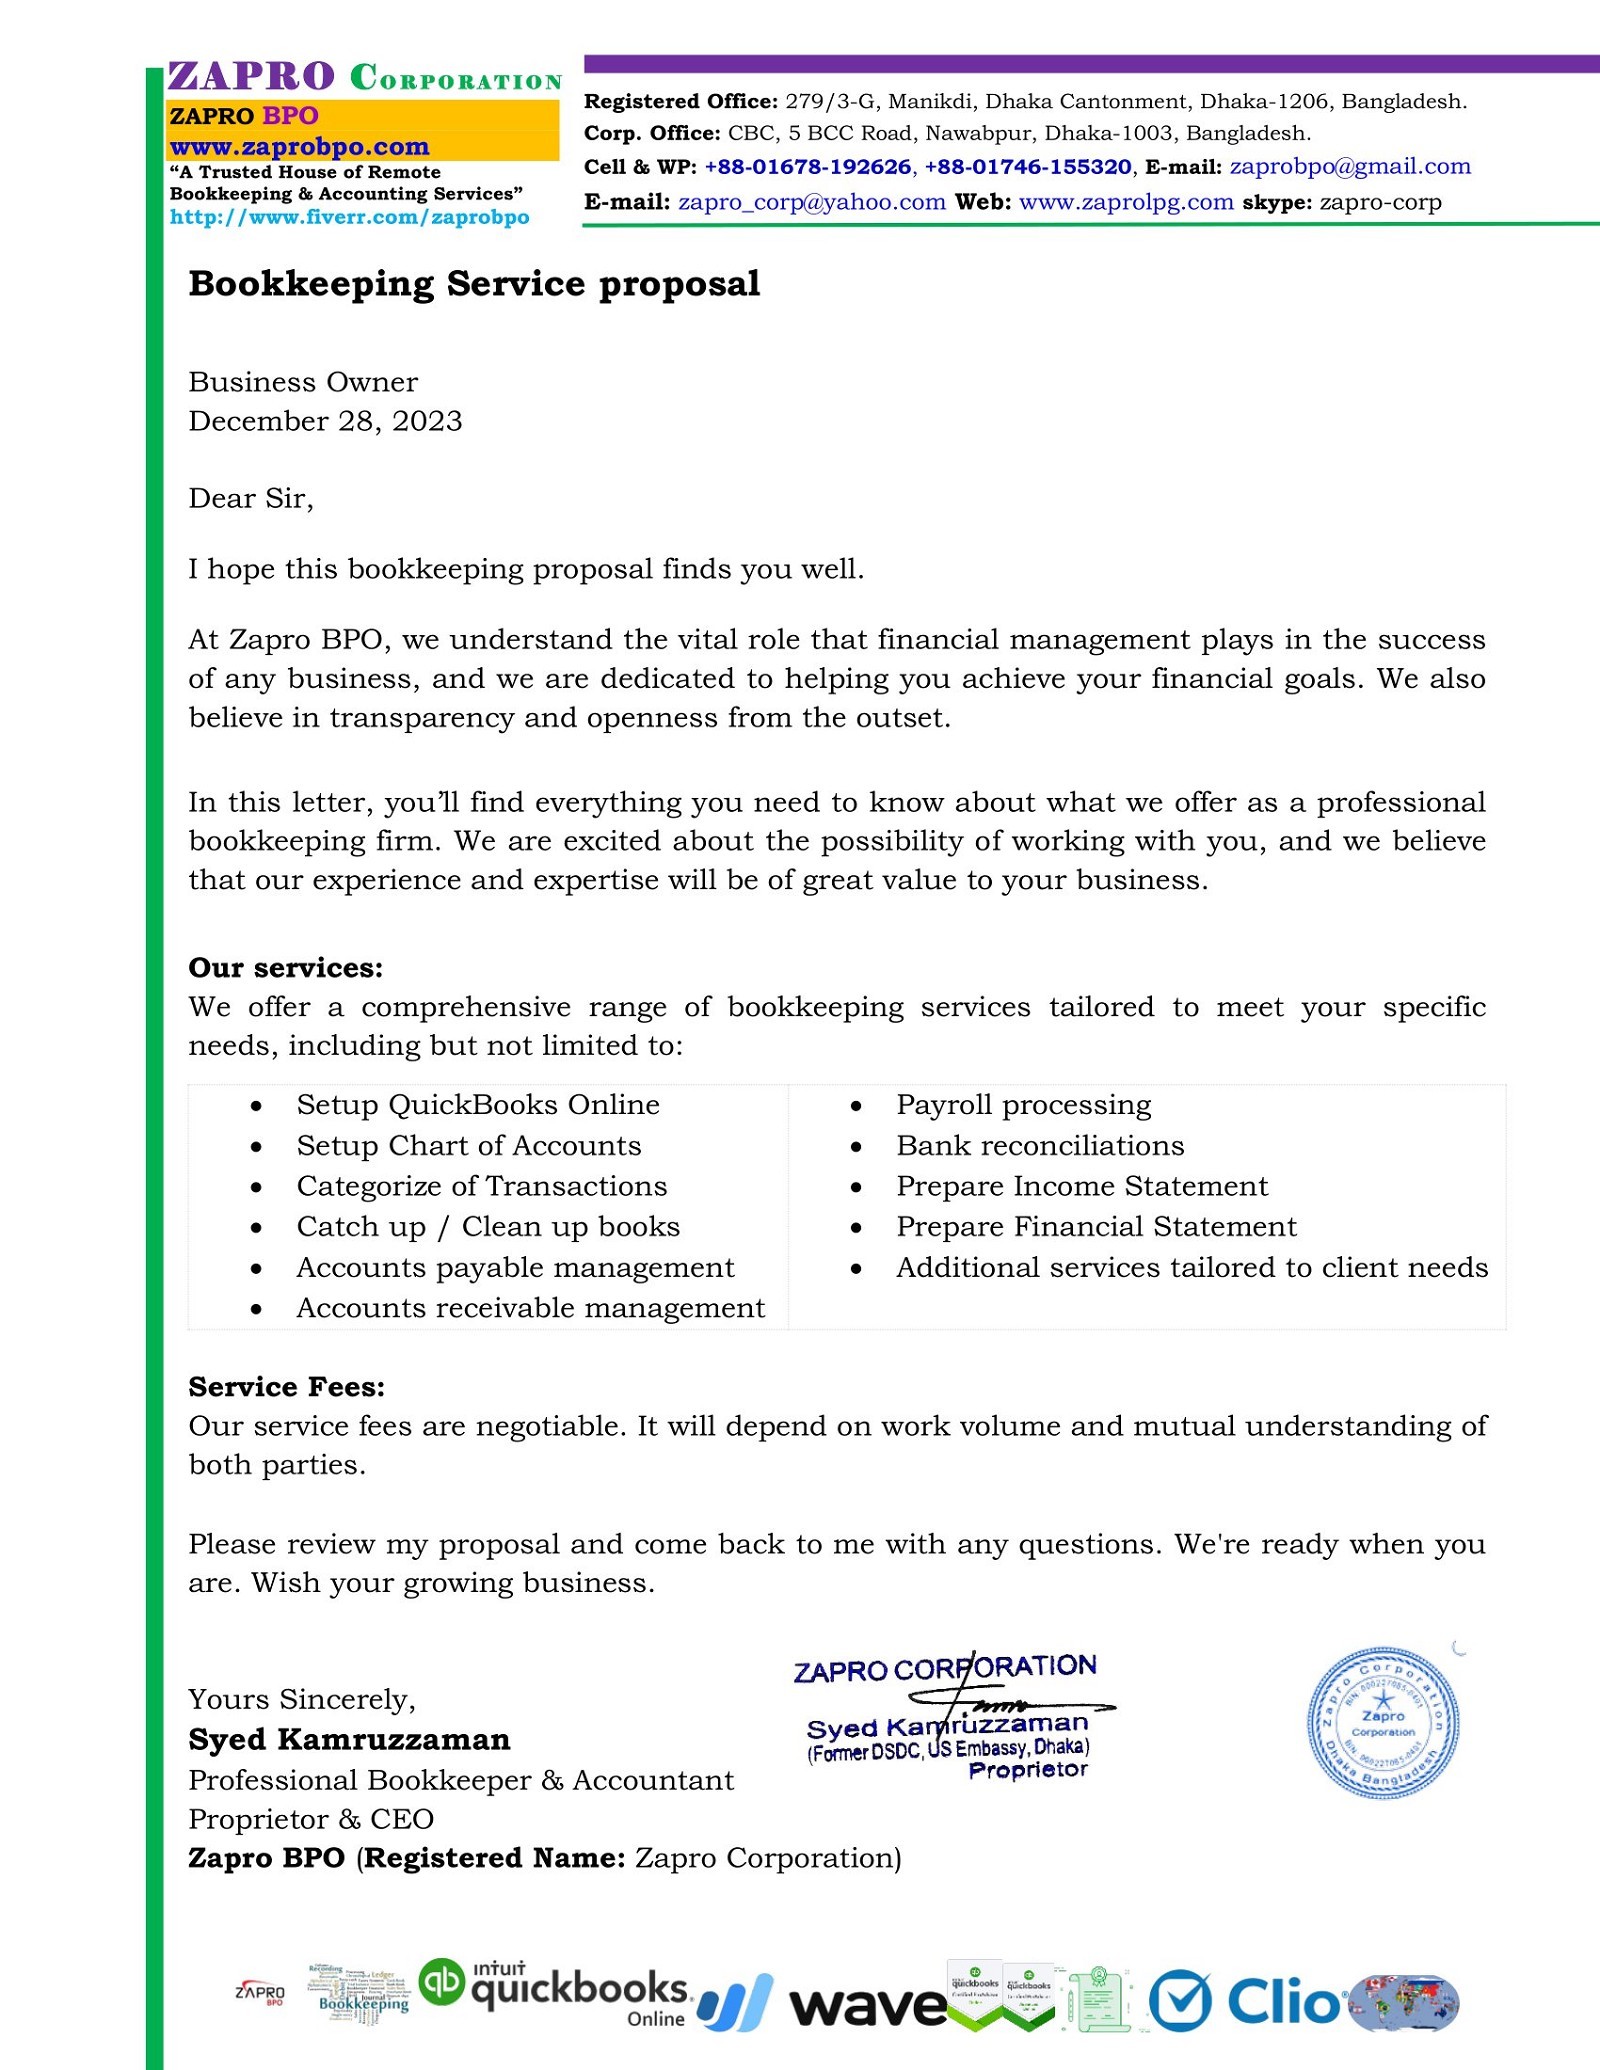 Bookkeeping proposal